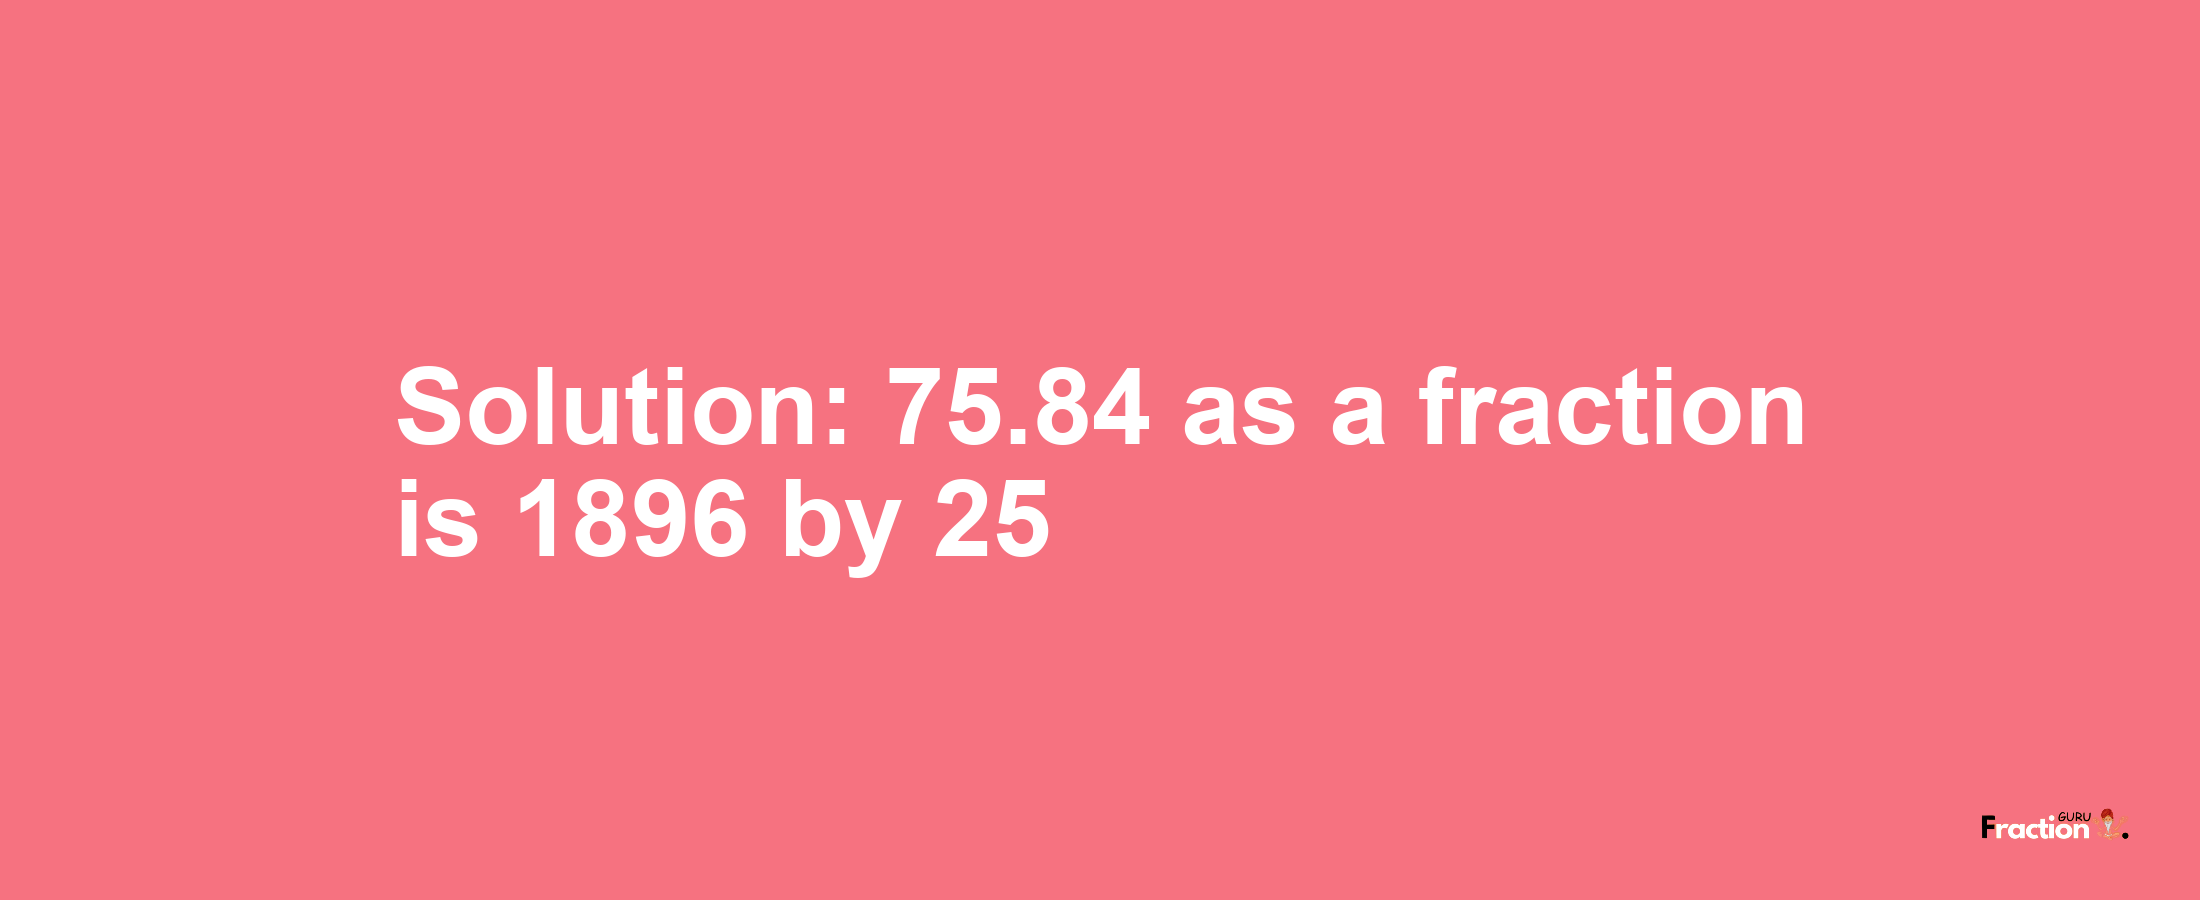 Solution:75.84 as a fraction is 1896/25